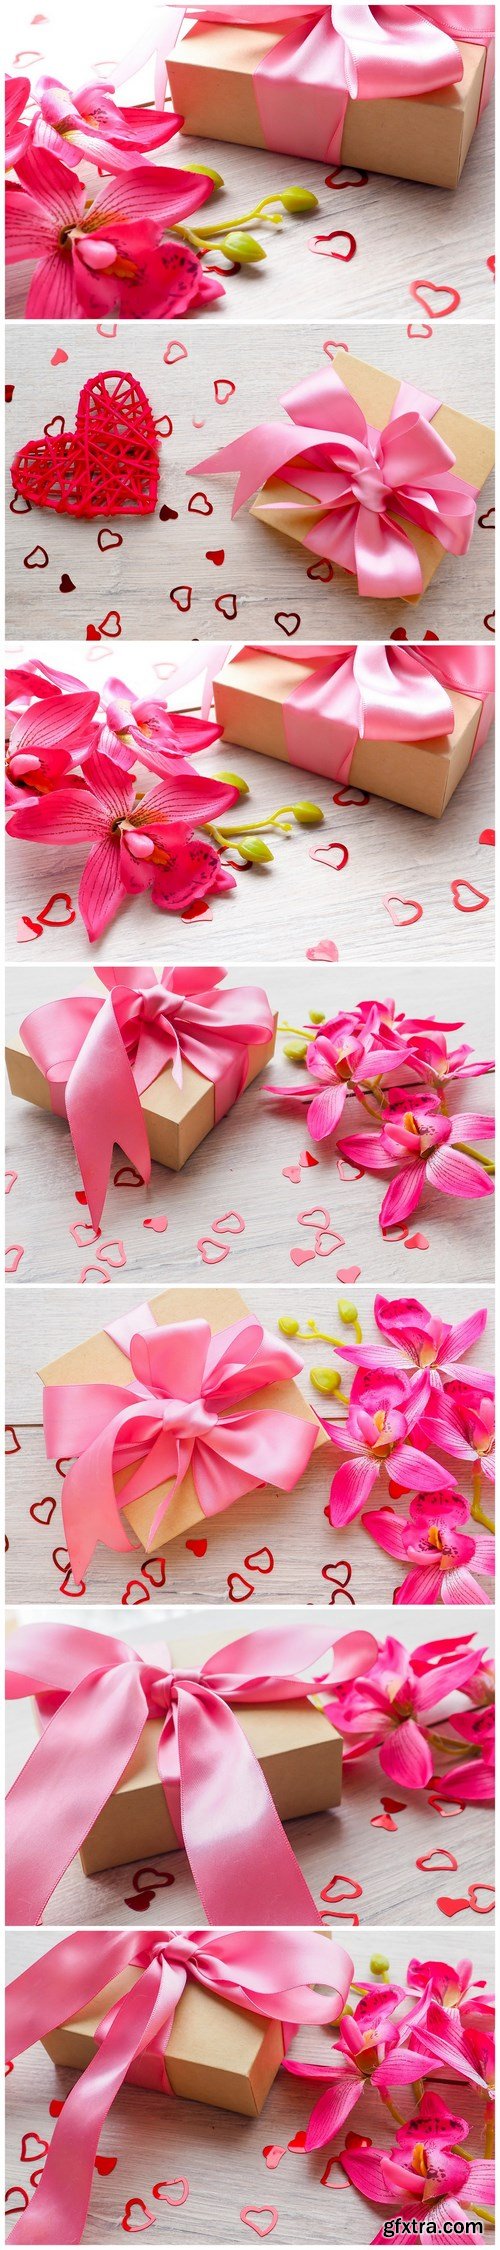 Gentle sweet composition for Valentines day, birthday, wedding in pink and red colors - Set of 7xUHQ JPEG Professional Stock Images